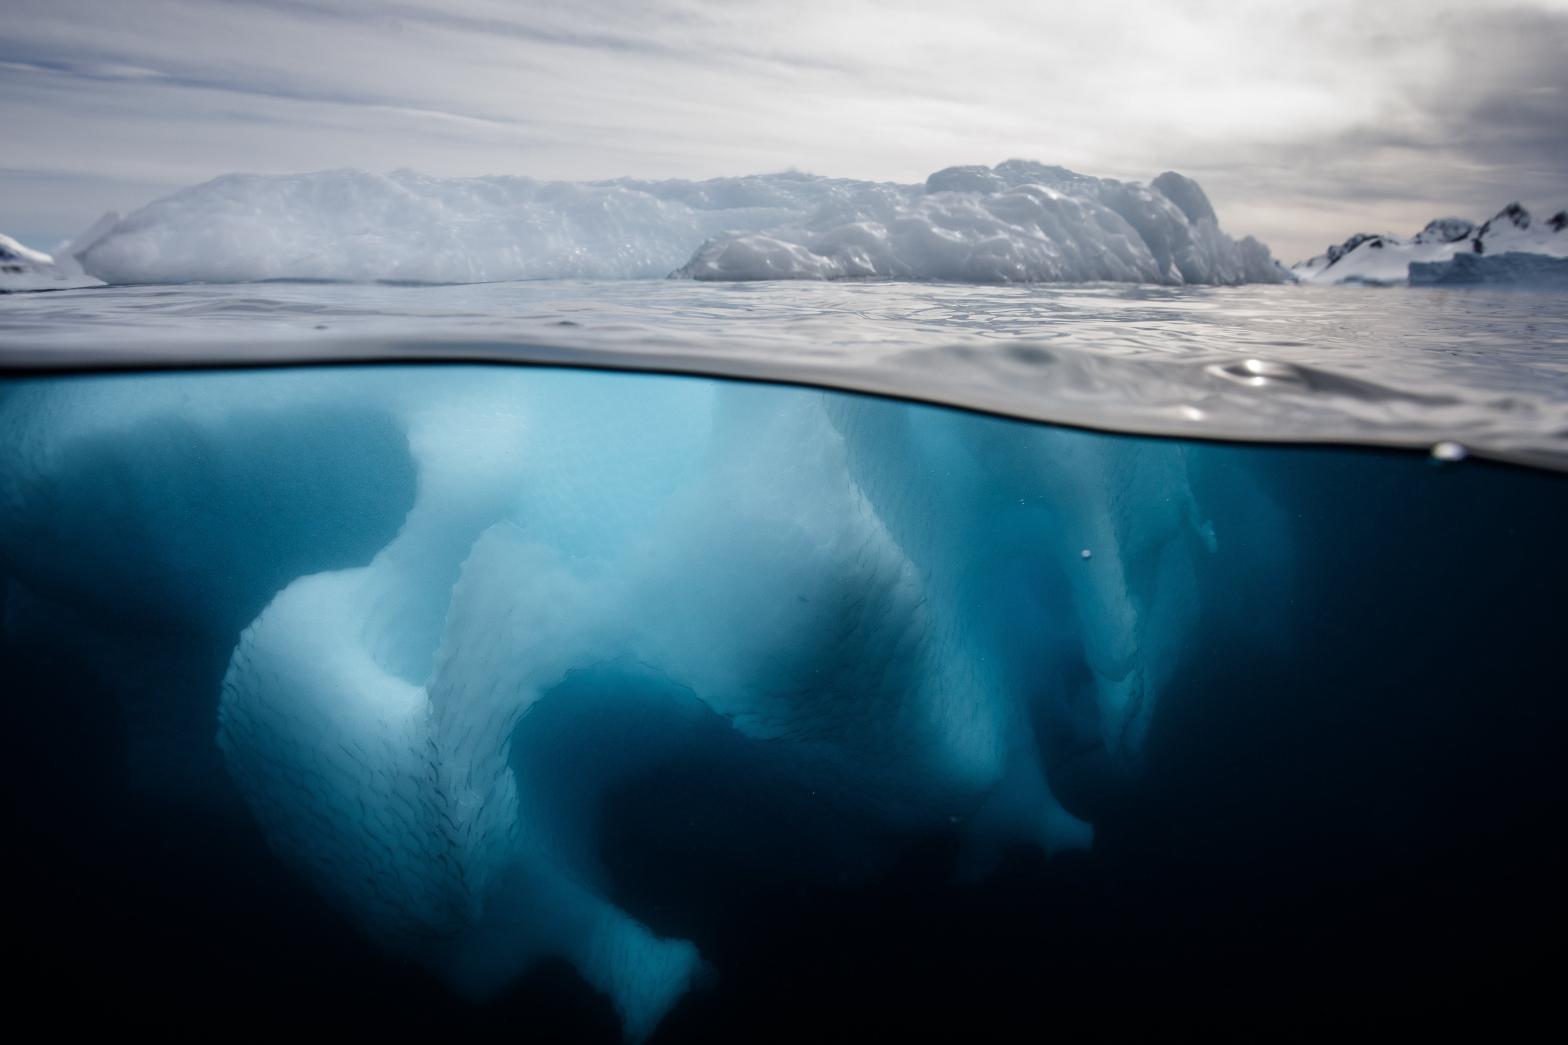 An underwater photo of an iceberg in the Southern Ocean offshore the Antarctic Peninsula. (Image: Brett Monroe Garner, Getty Images)